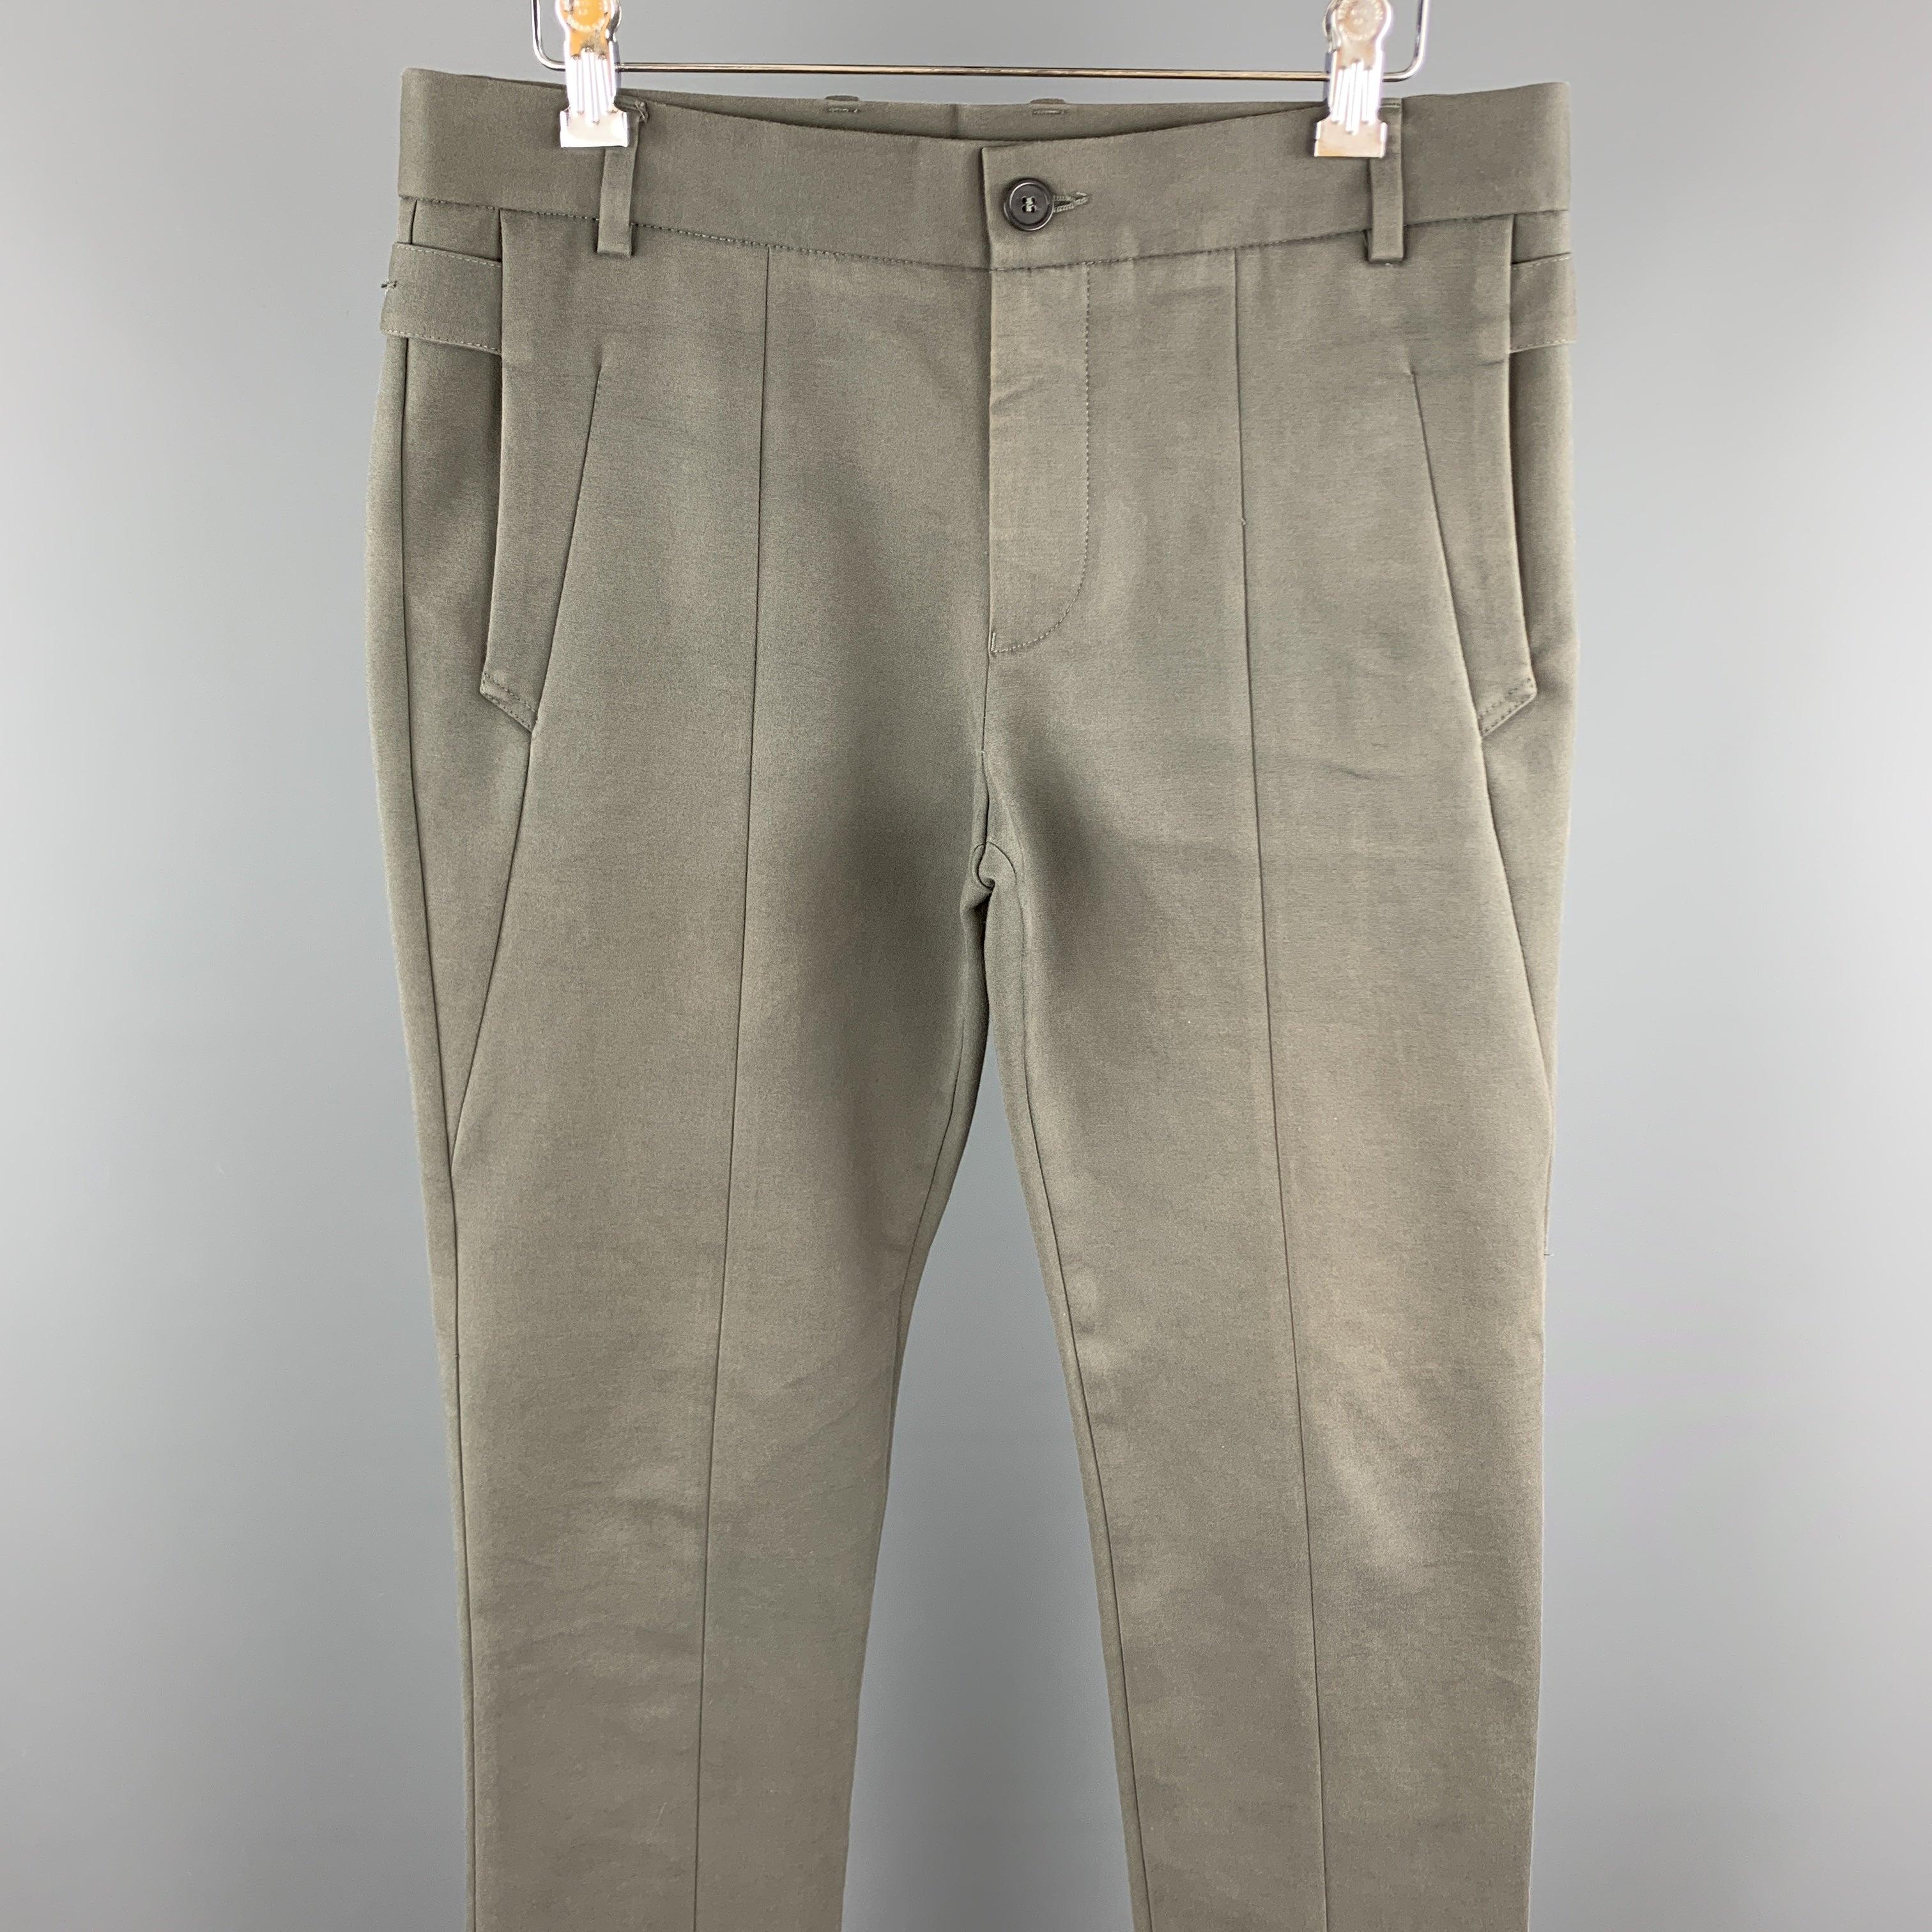 EMPORIO ARMANI casual pants comes in a slate cotton / elastane featuring stitching details, buttoned pocket attachment, and a zip fly closure. As Is. Made in Italy.
Very Good
Pre-Owned Condition. 

Marked:   IT 46 

Measurements: 
  Waist: 33 inches